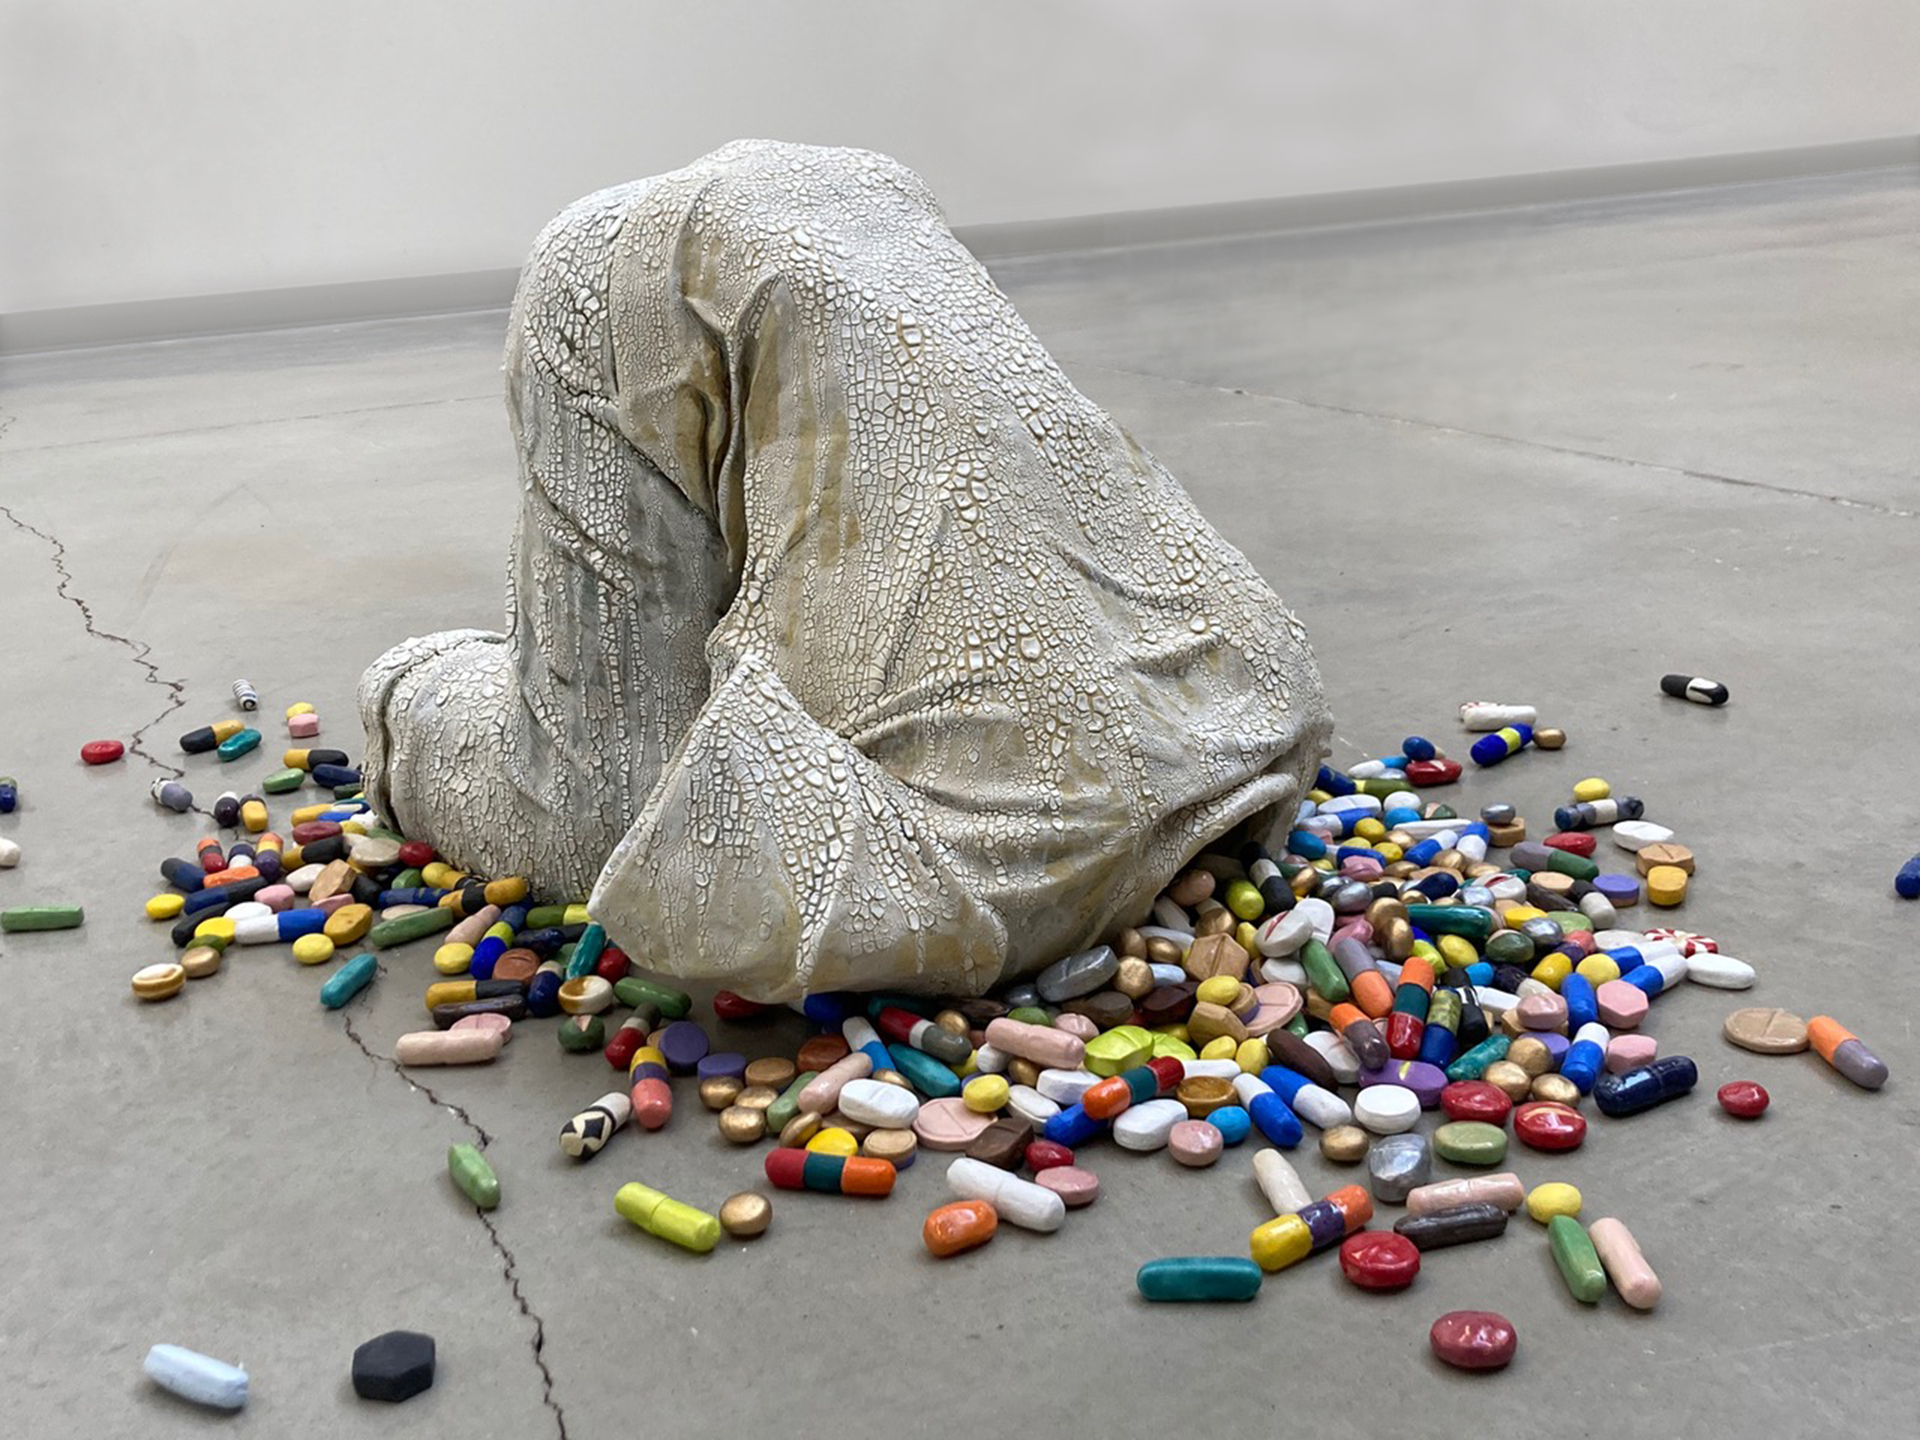 Shoko Tanaka’s project Pills is grazed ceramic sculpture of a kneeling prostate headless figure with an array of hundreds of pills flowing from the void of the torso through the neck. A powerful statement about the opioid crisis, Tanaka expands the message to include cults of personality or negative effects of digital media.